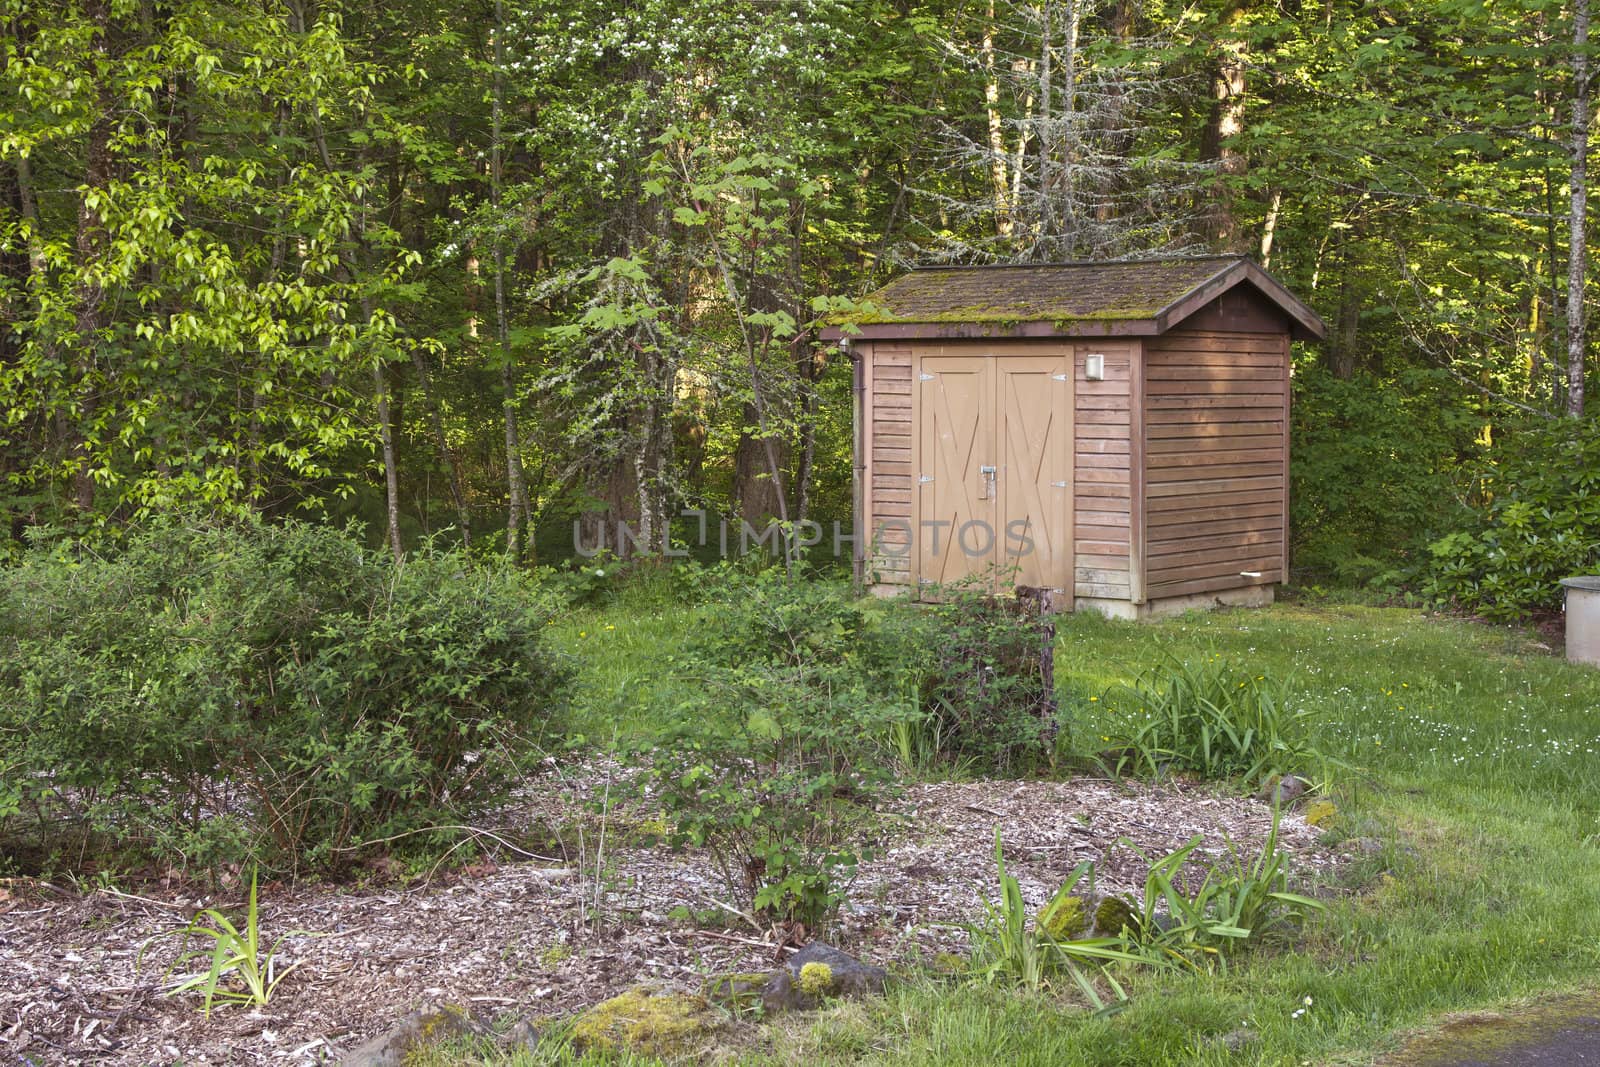 Small storage shed in a forest. by Rigucci